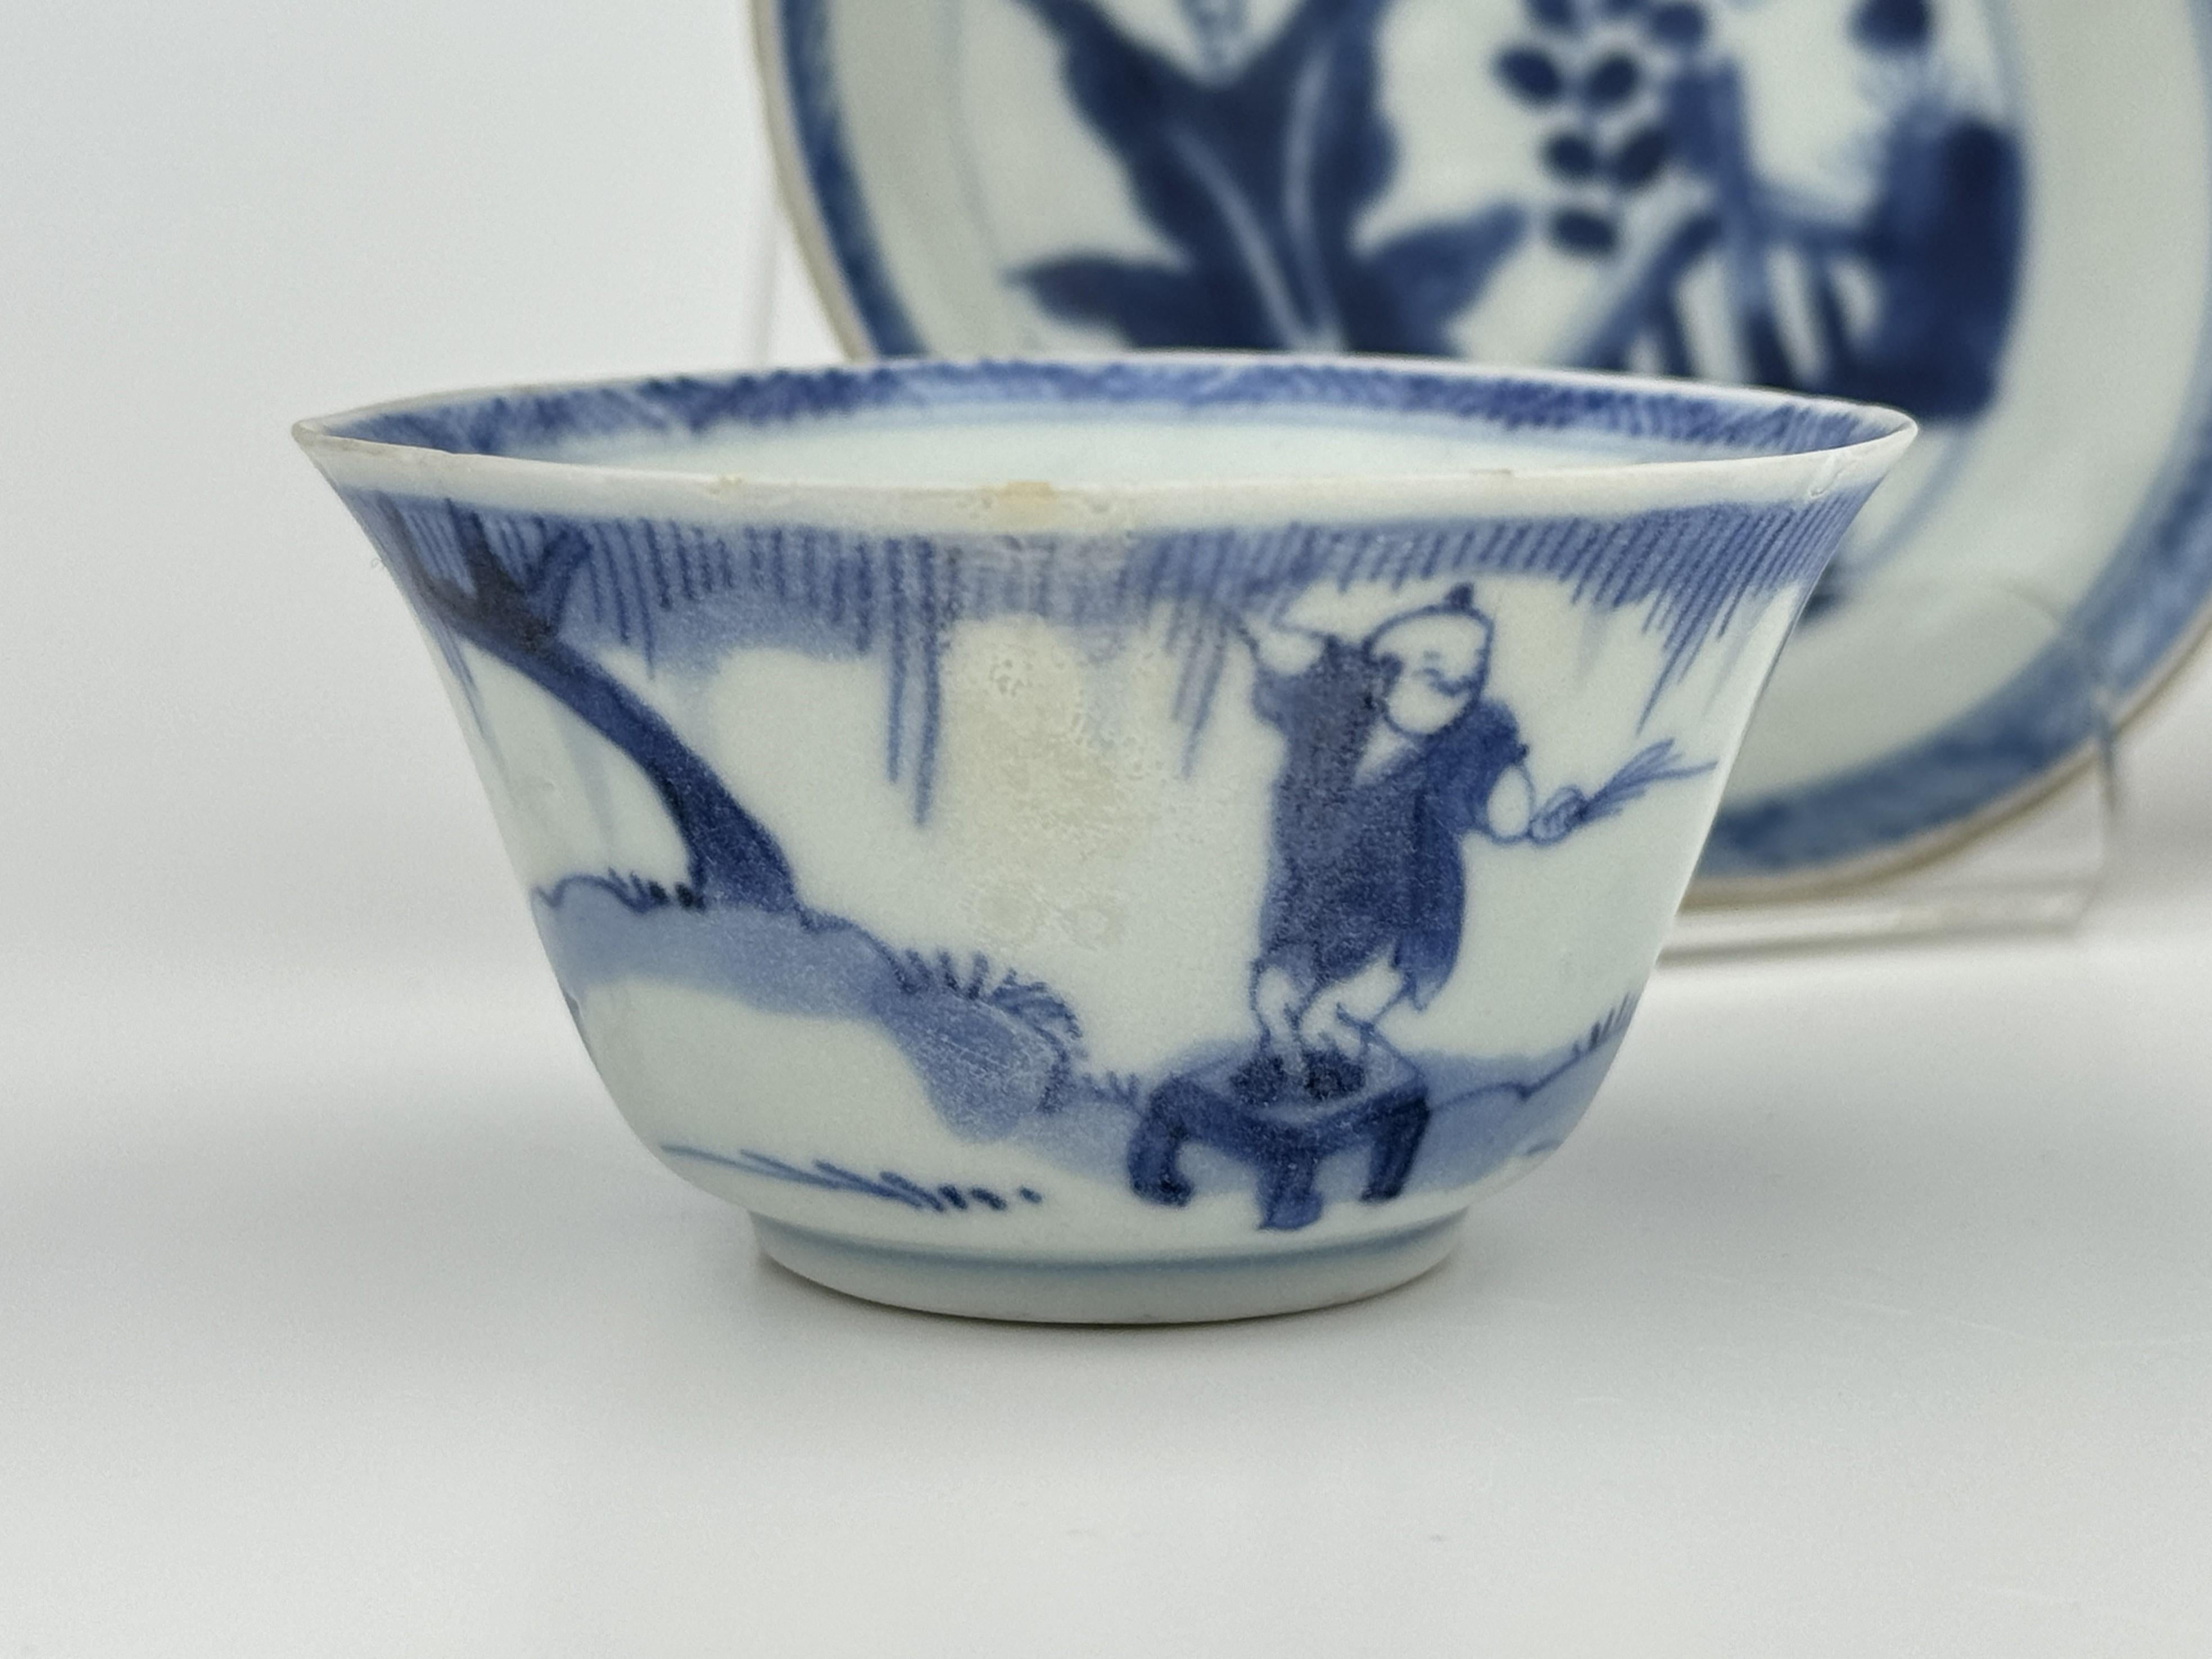 Ceramic Blue and White Tea Set c 1725, Qing Dynasty, Yongzheng Reign For Sale